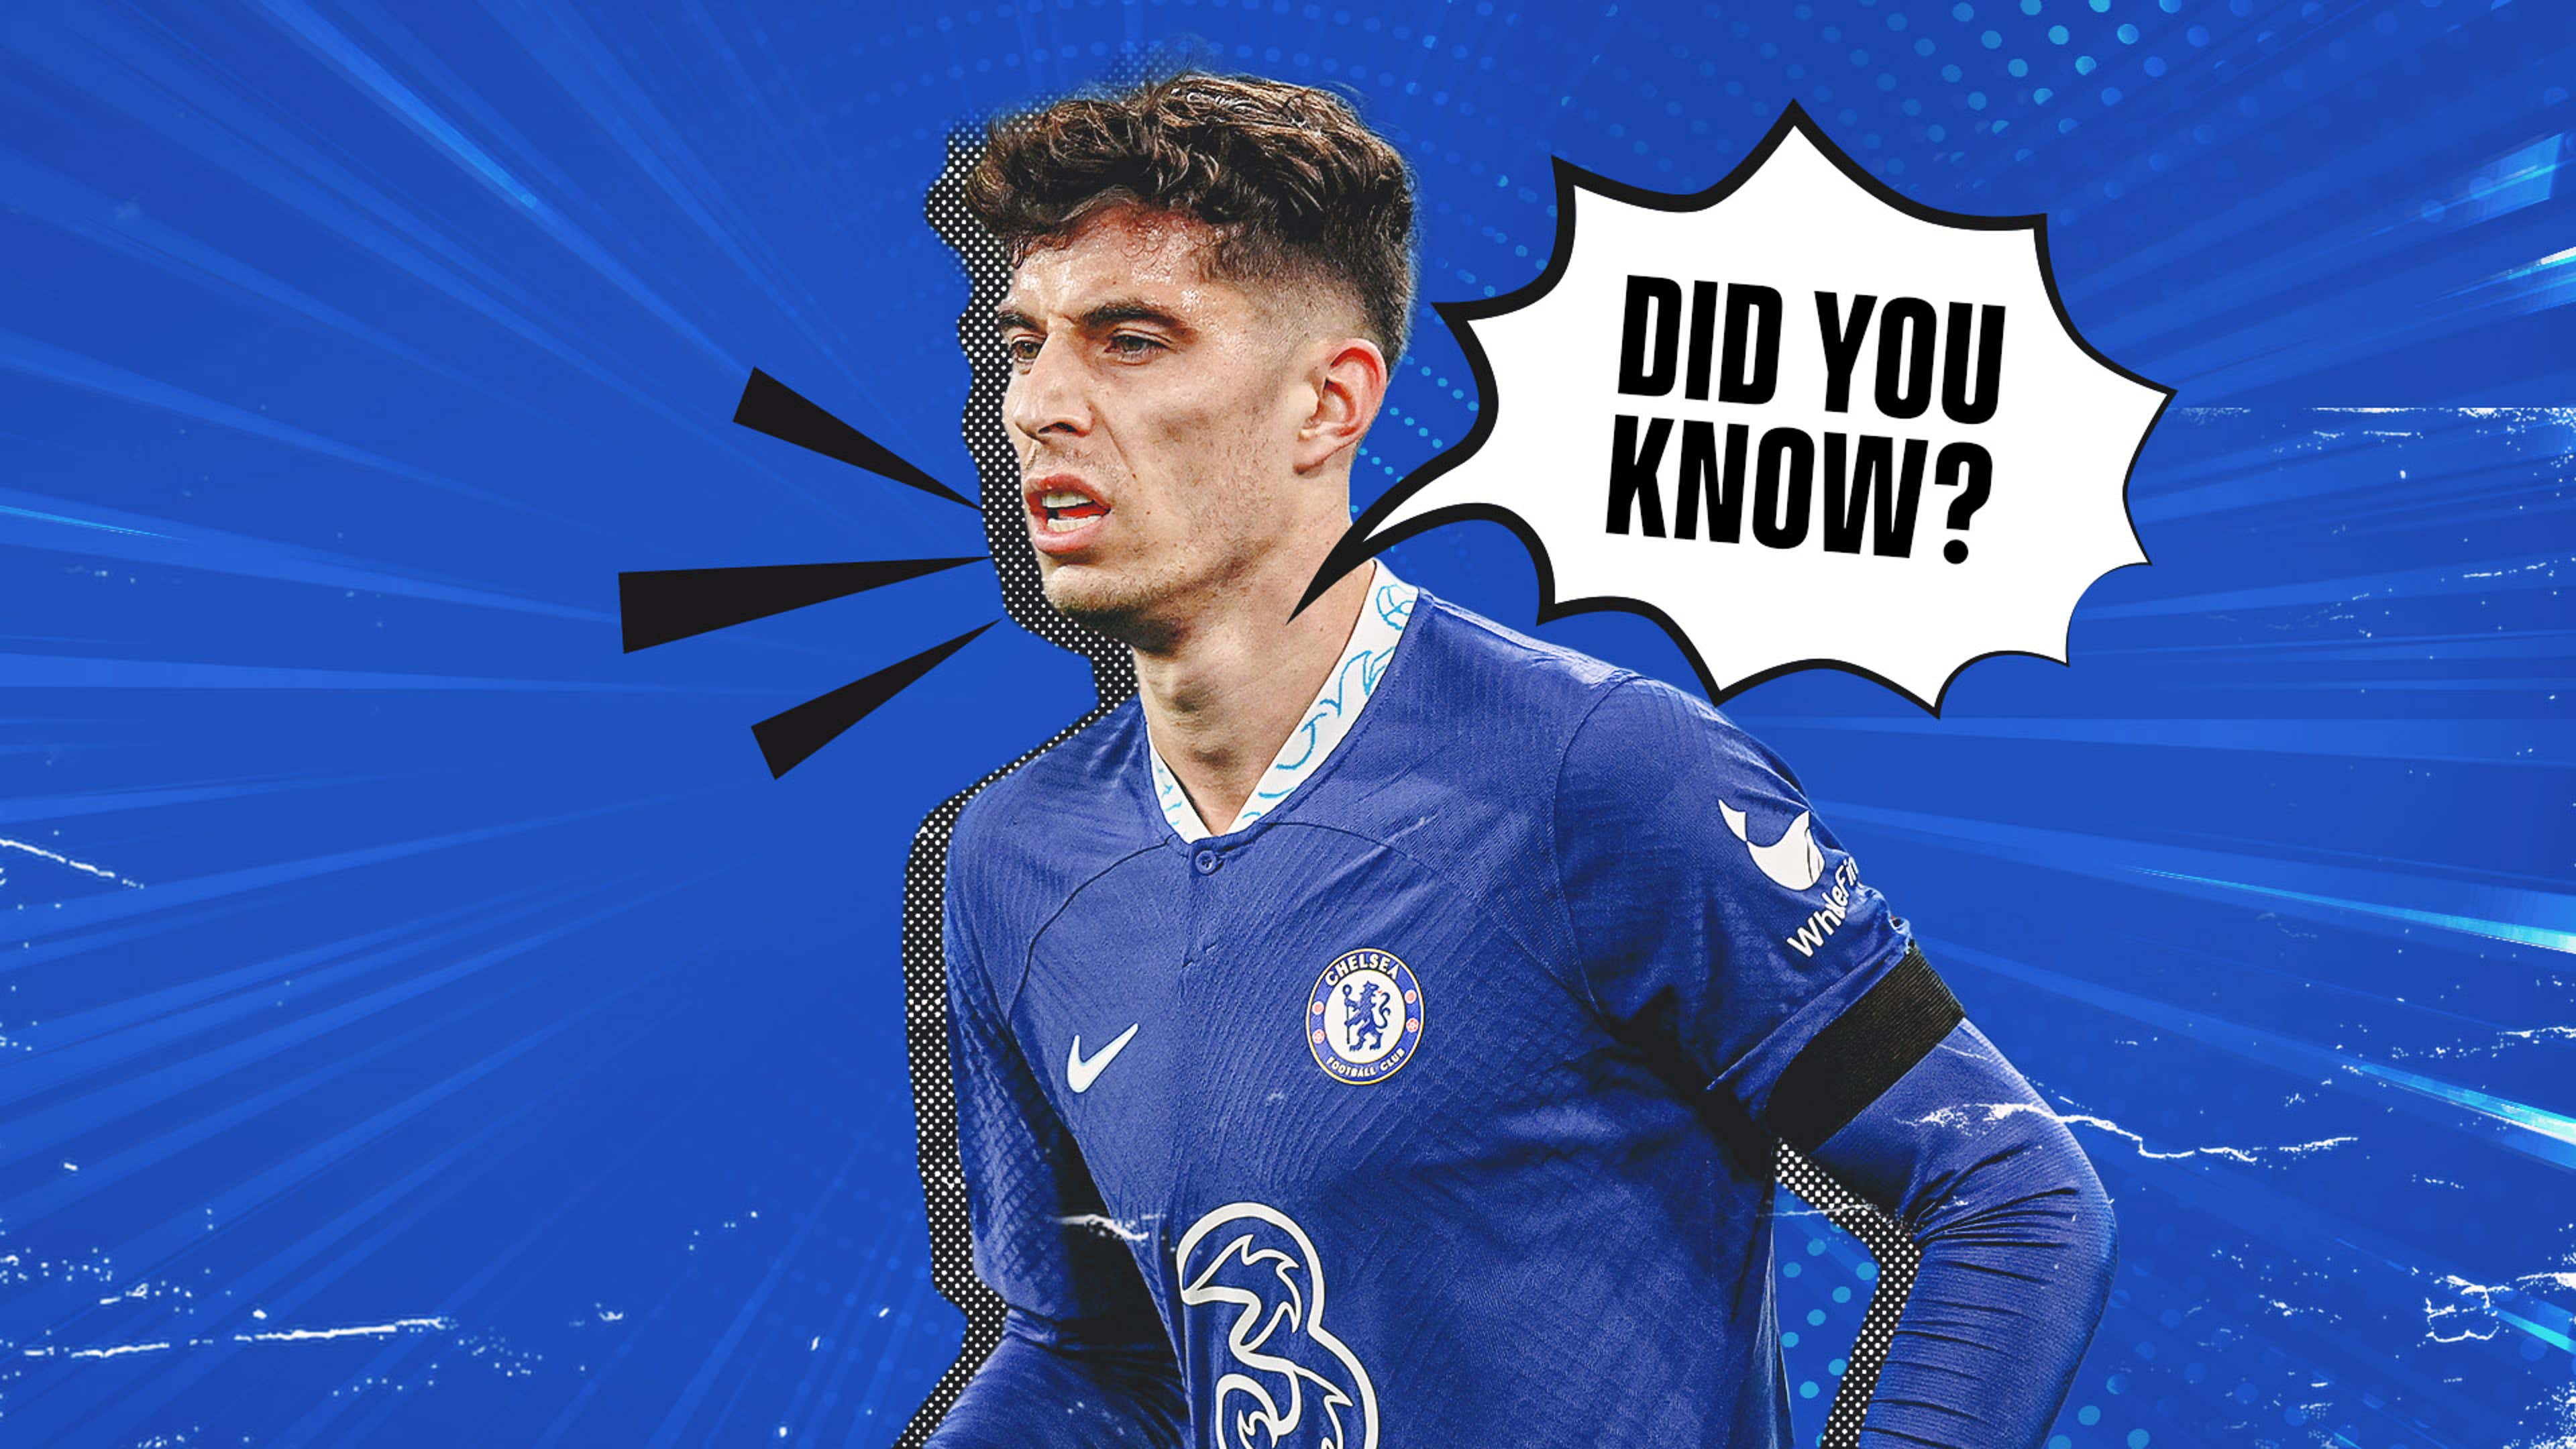  Did You Know_Chelsea_Havertz